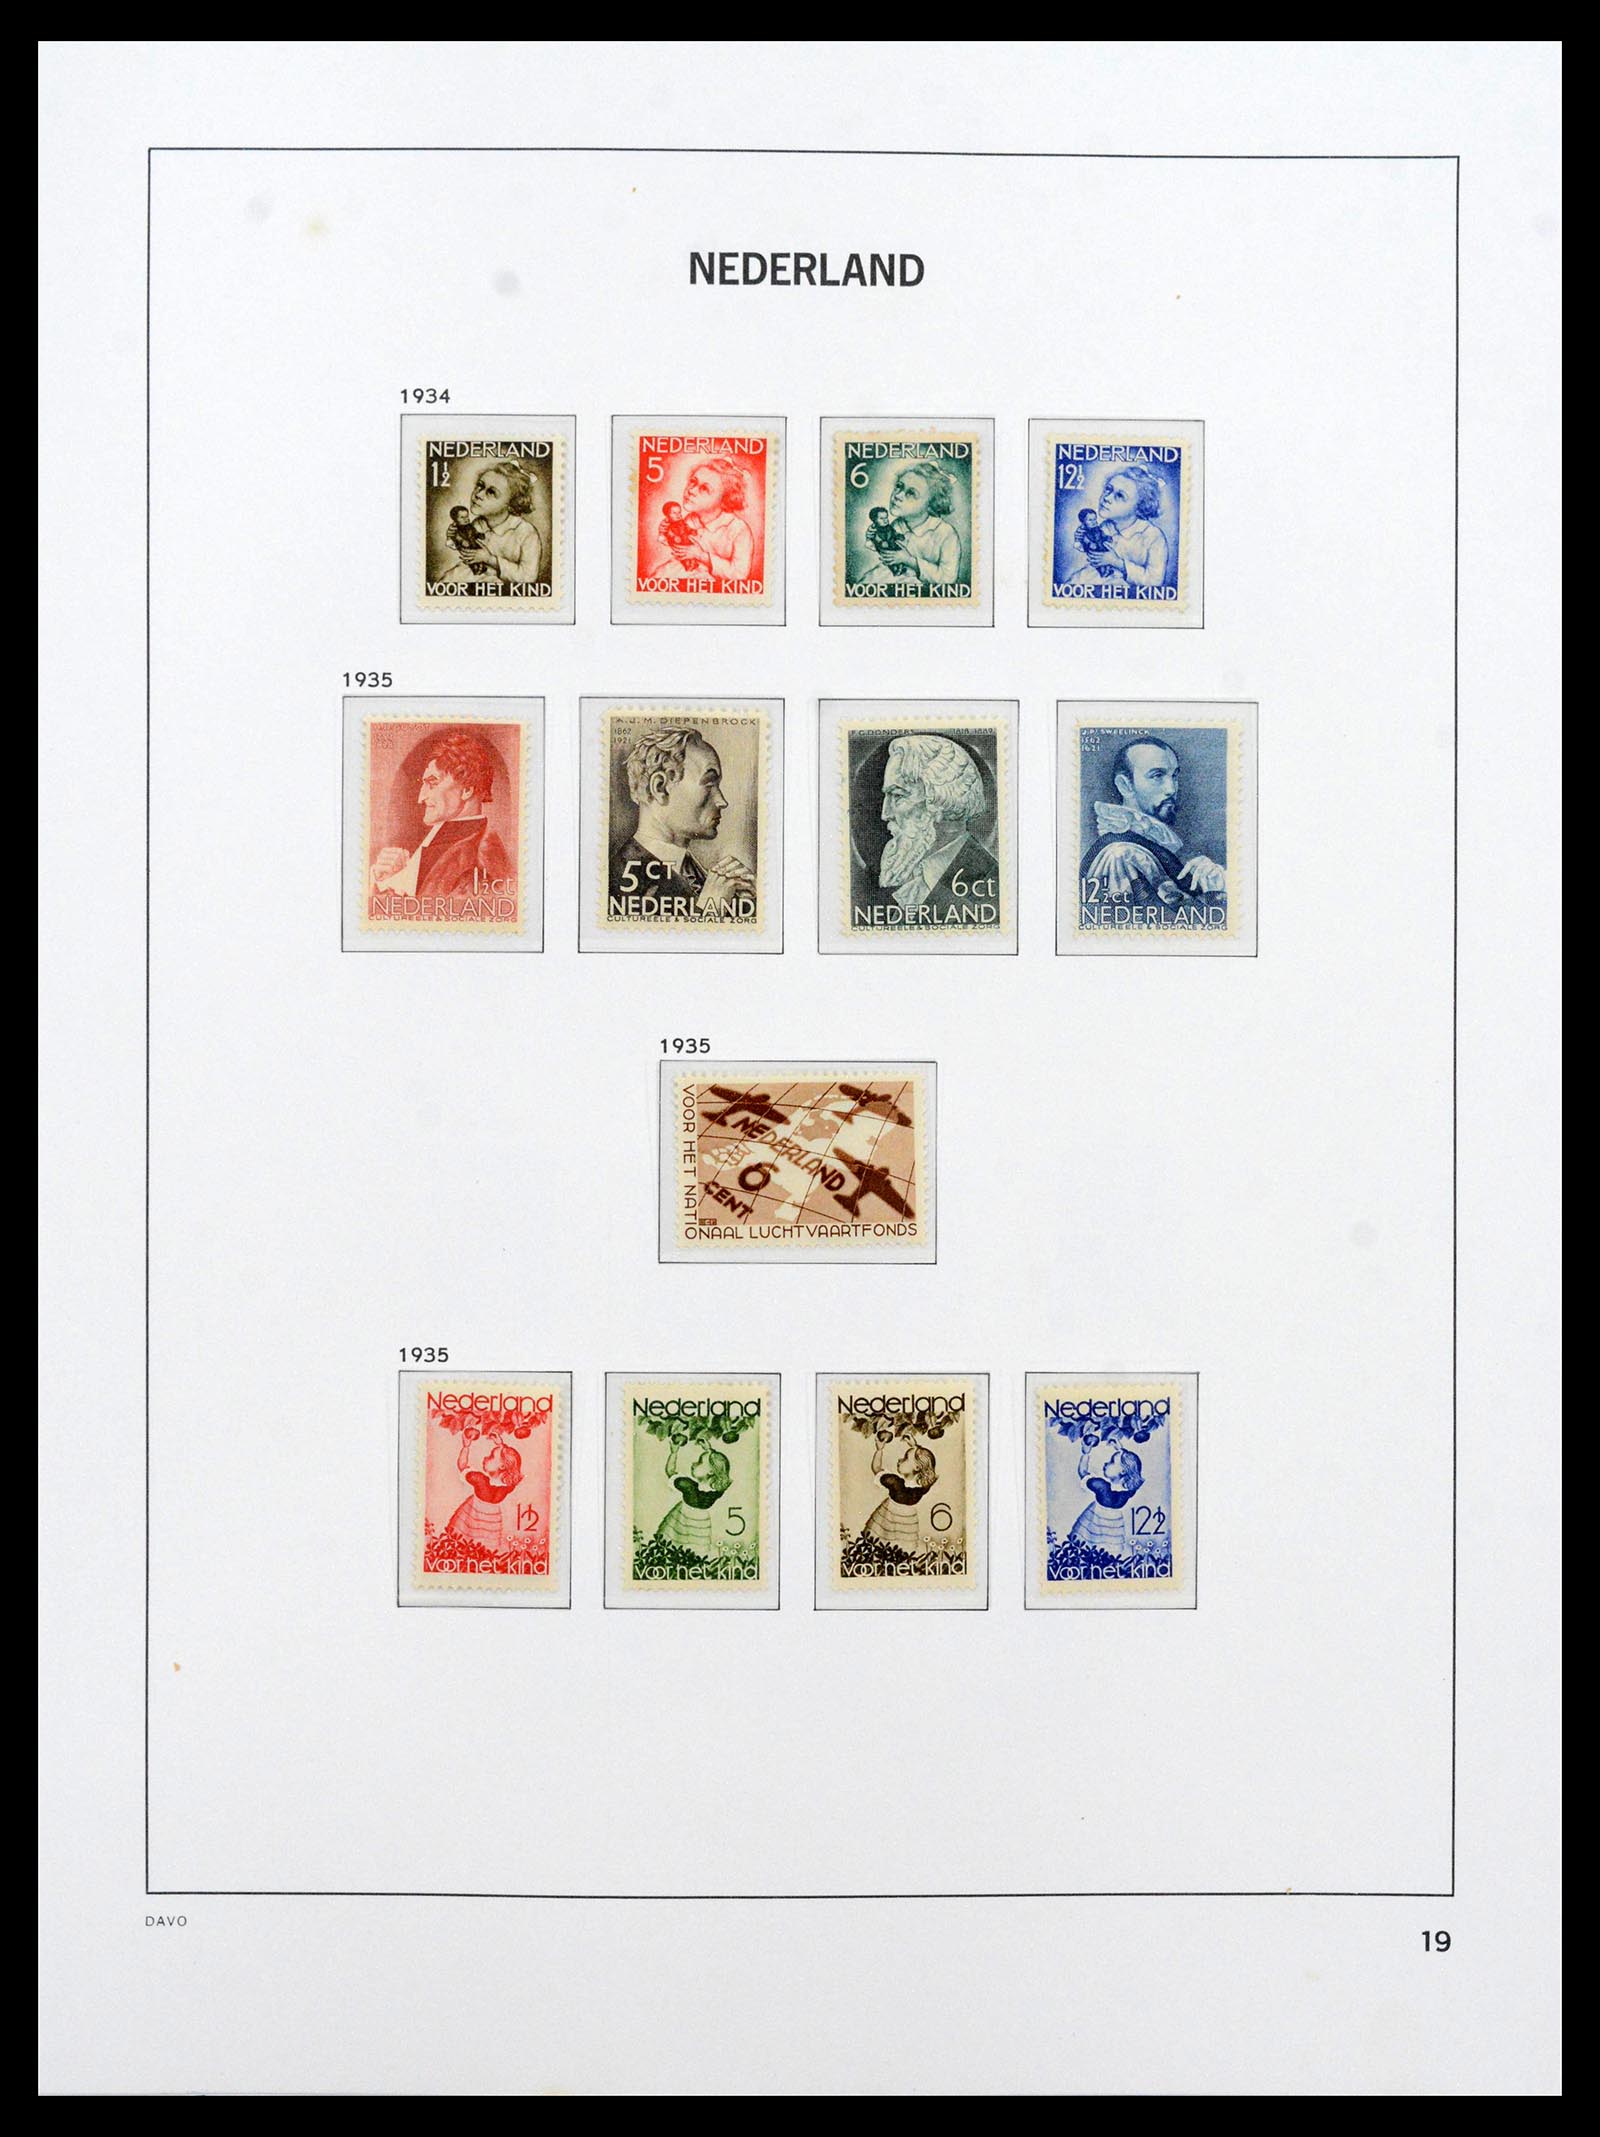 39035 0019 - Stamp collection 39035 Netherlands 1852-1968.